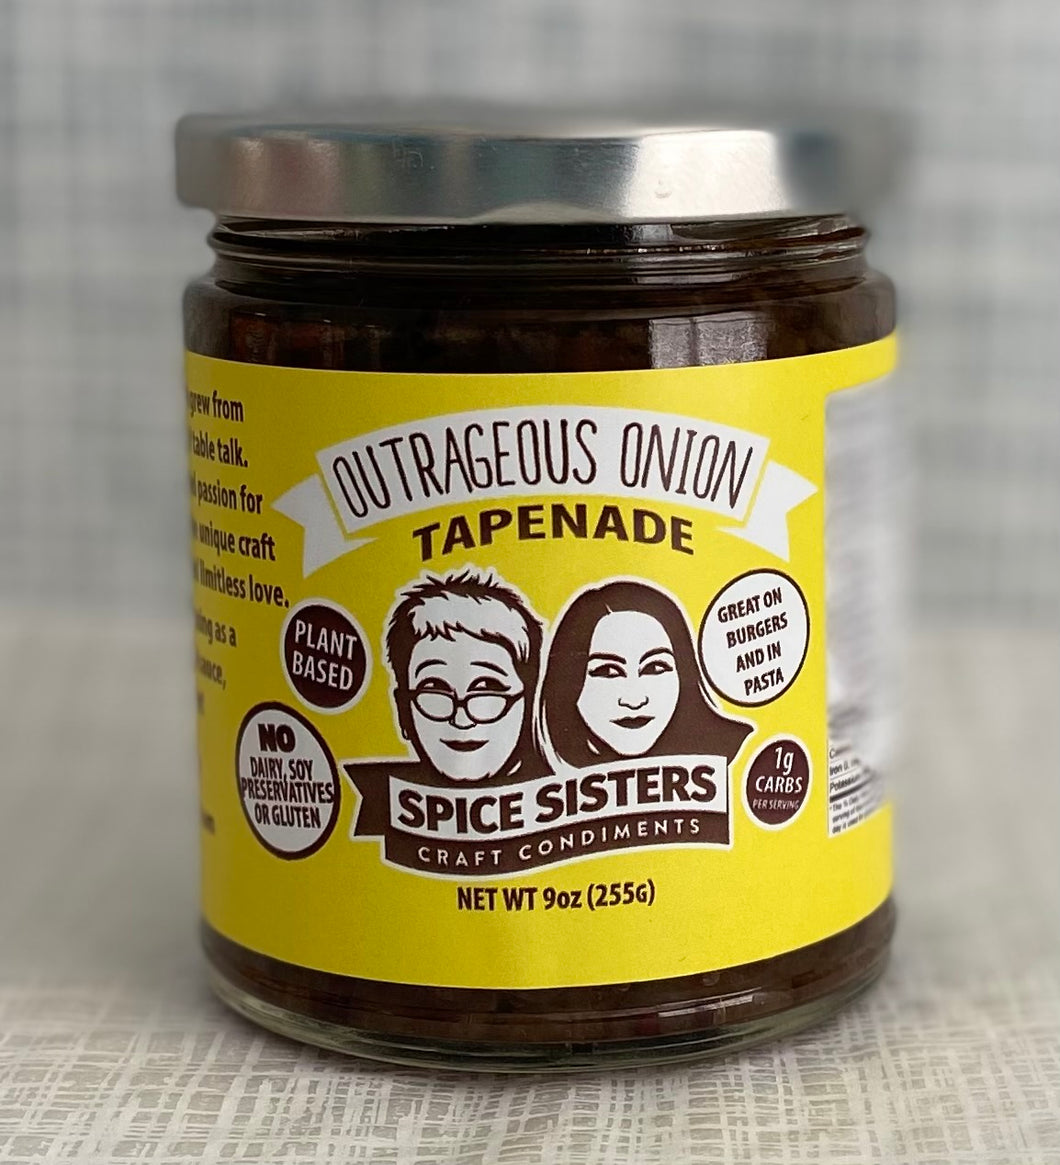 Outrageous Onion Tapenade